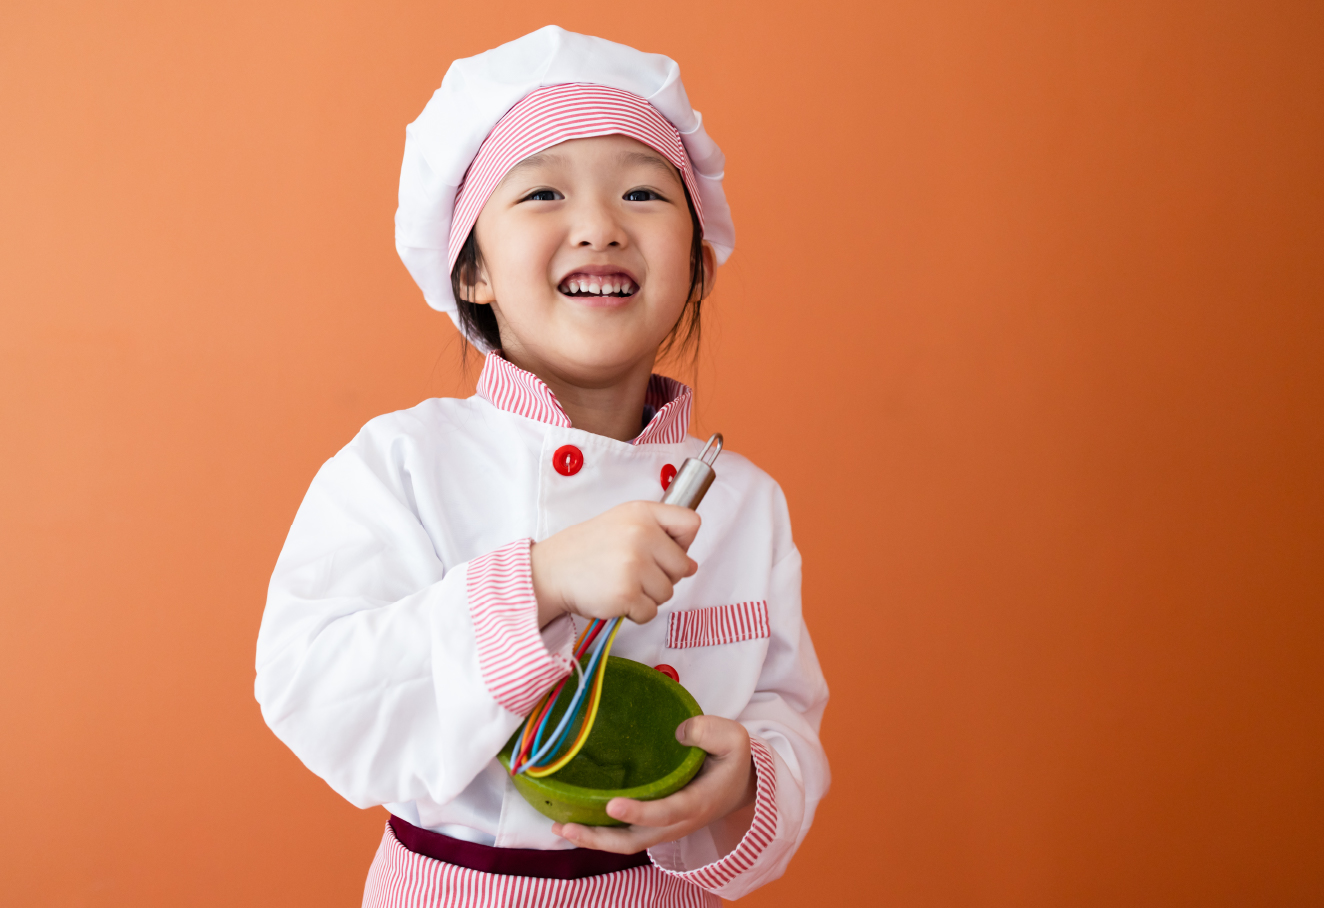 A little girl is dressed up in chef costume.